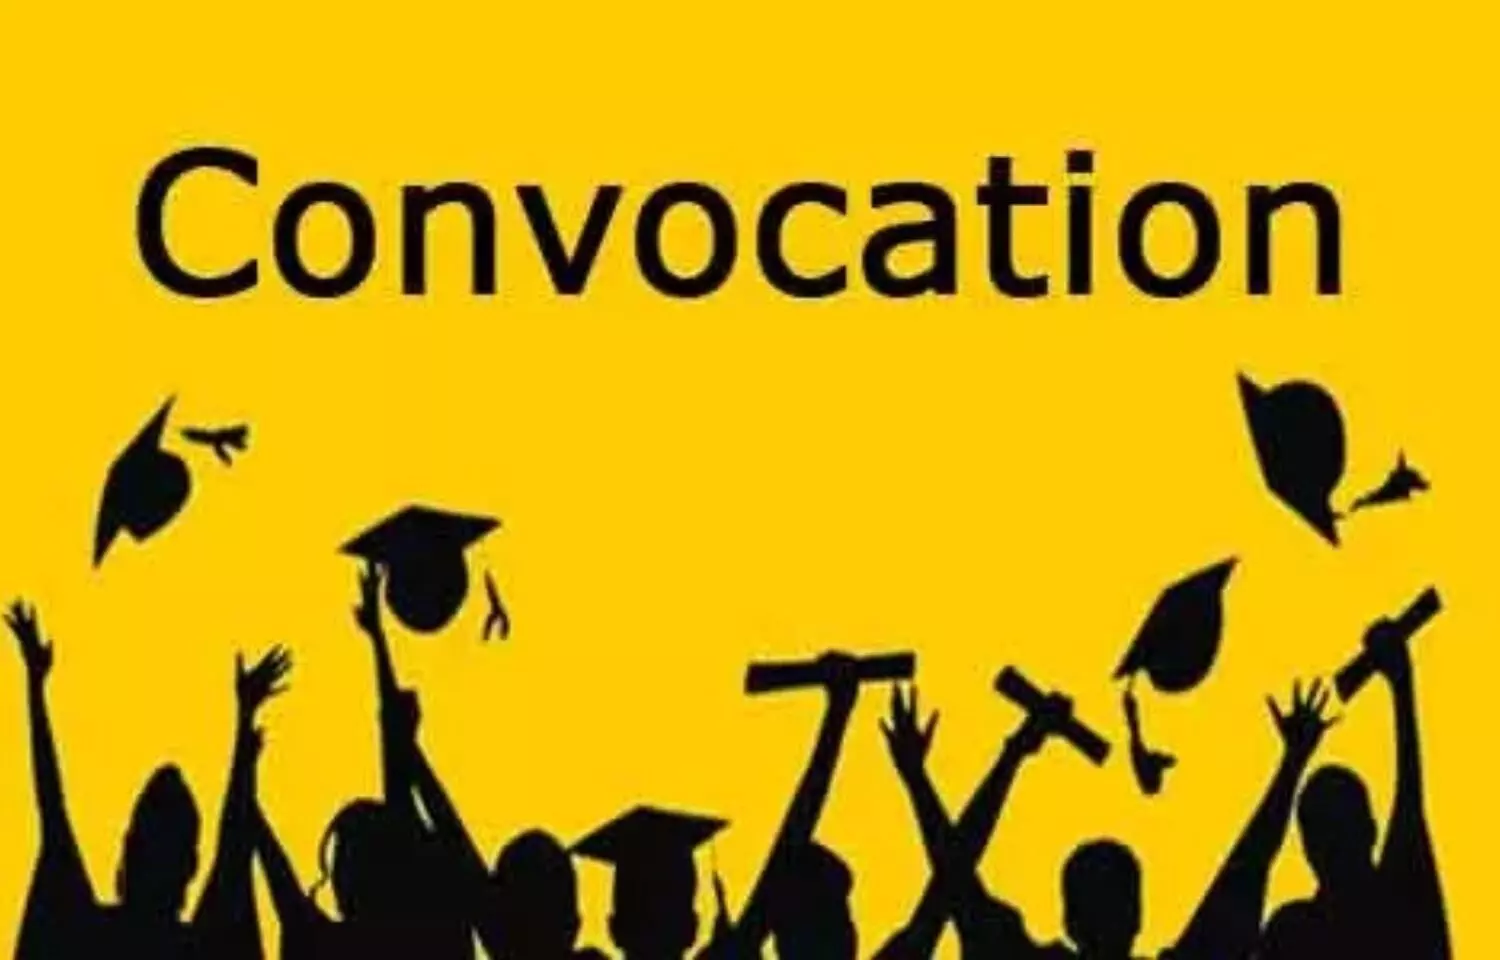 Dr NTR University of Health Sciences to hold 24th, 25th Annual Convocation in July, Apply by June 6, Check out all details